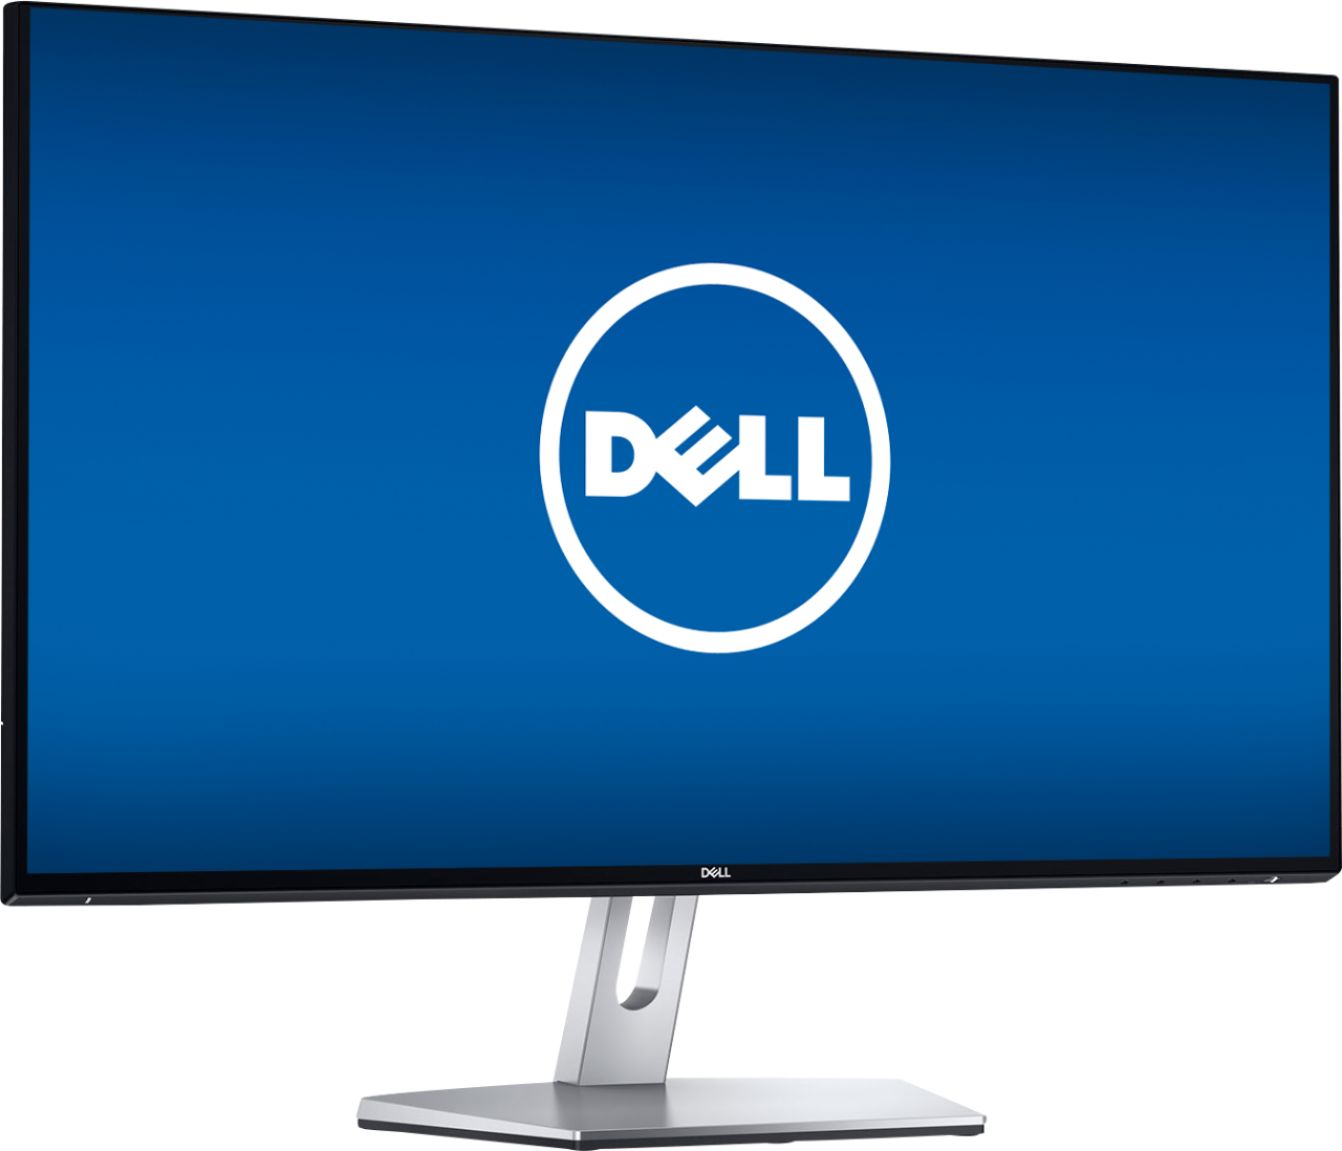 Angle View: Dell - Geek Squad Certified Refurbished 27" IPS LED FHD Monitor - Black/Silver